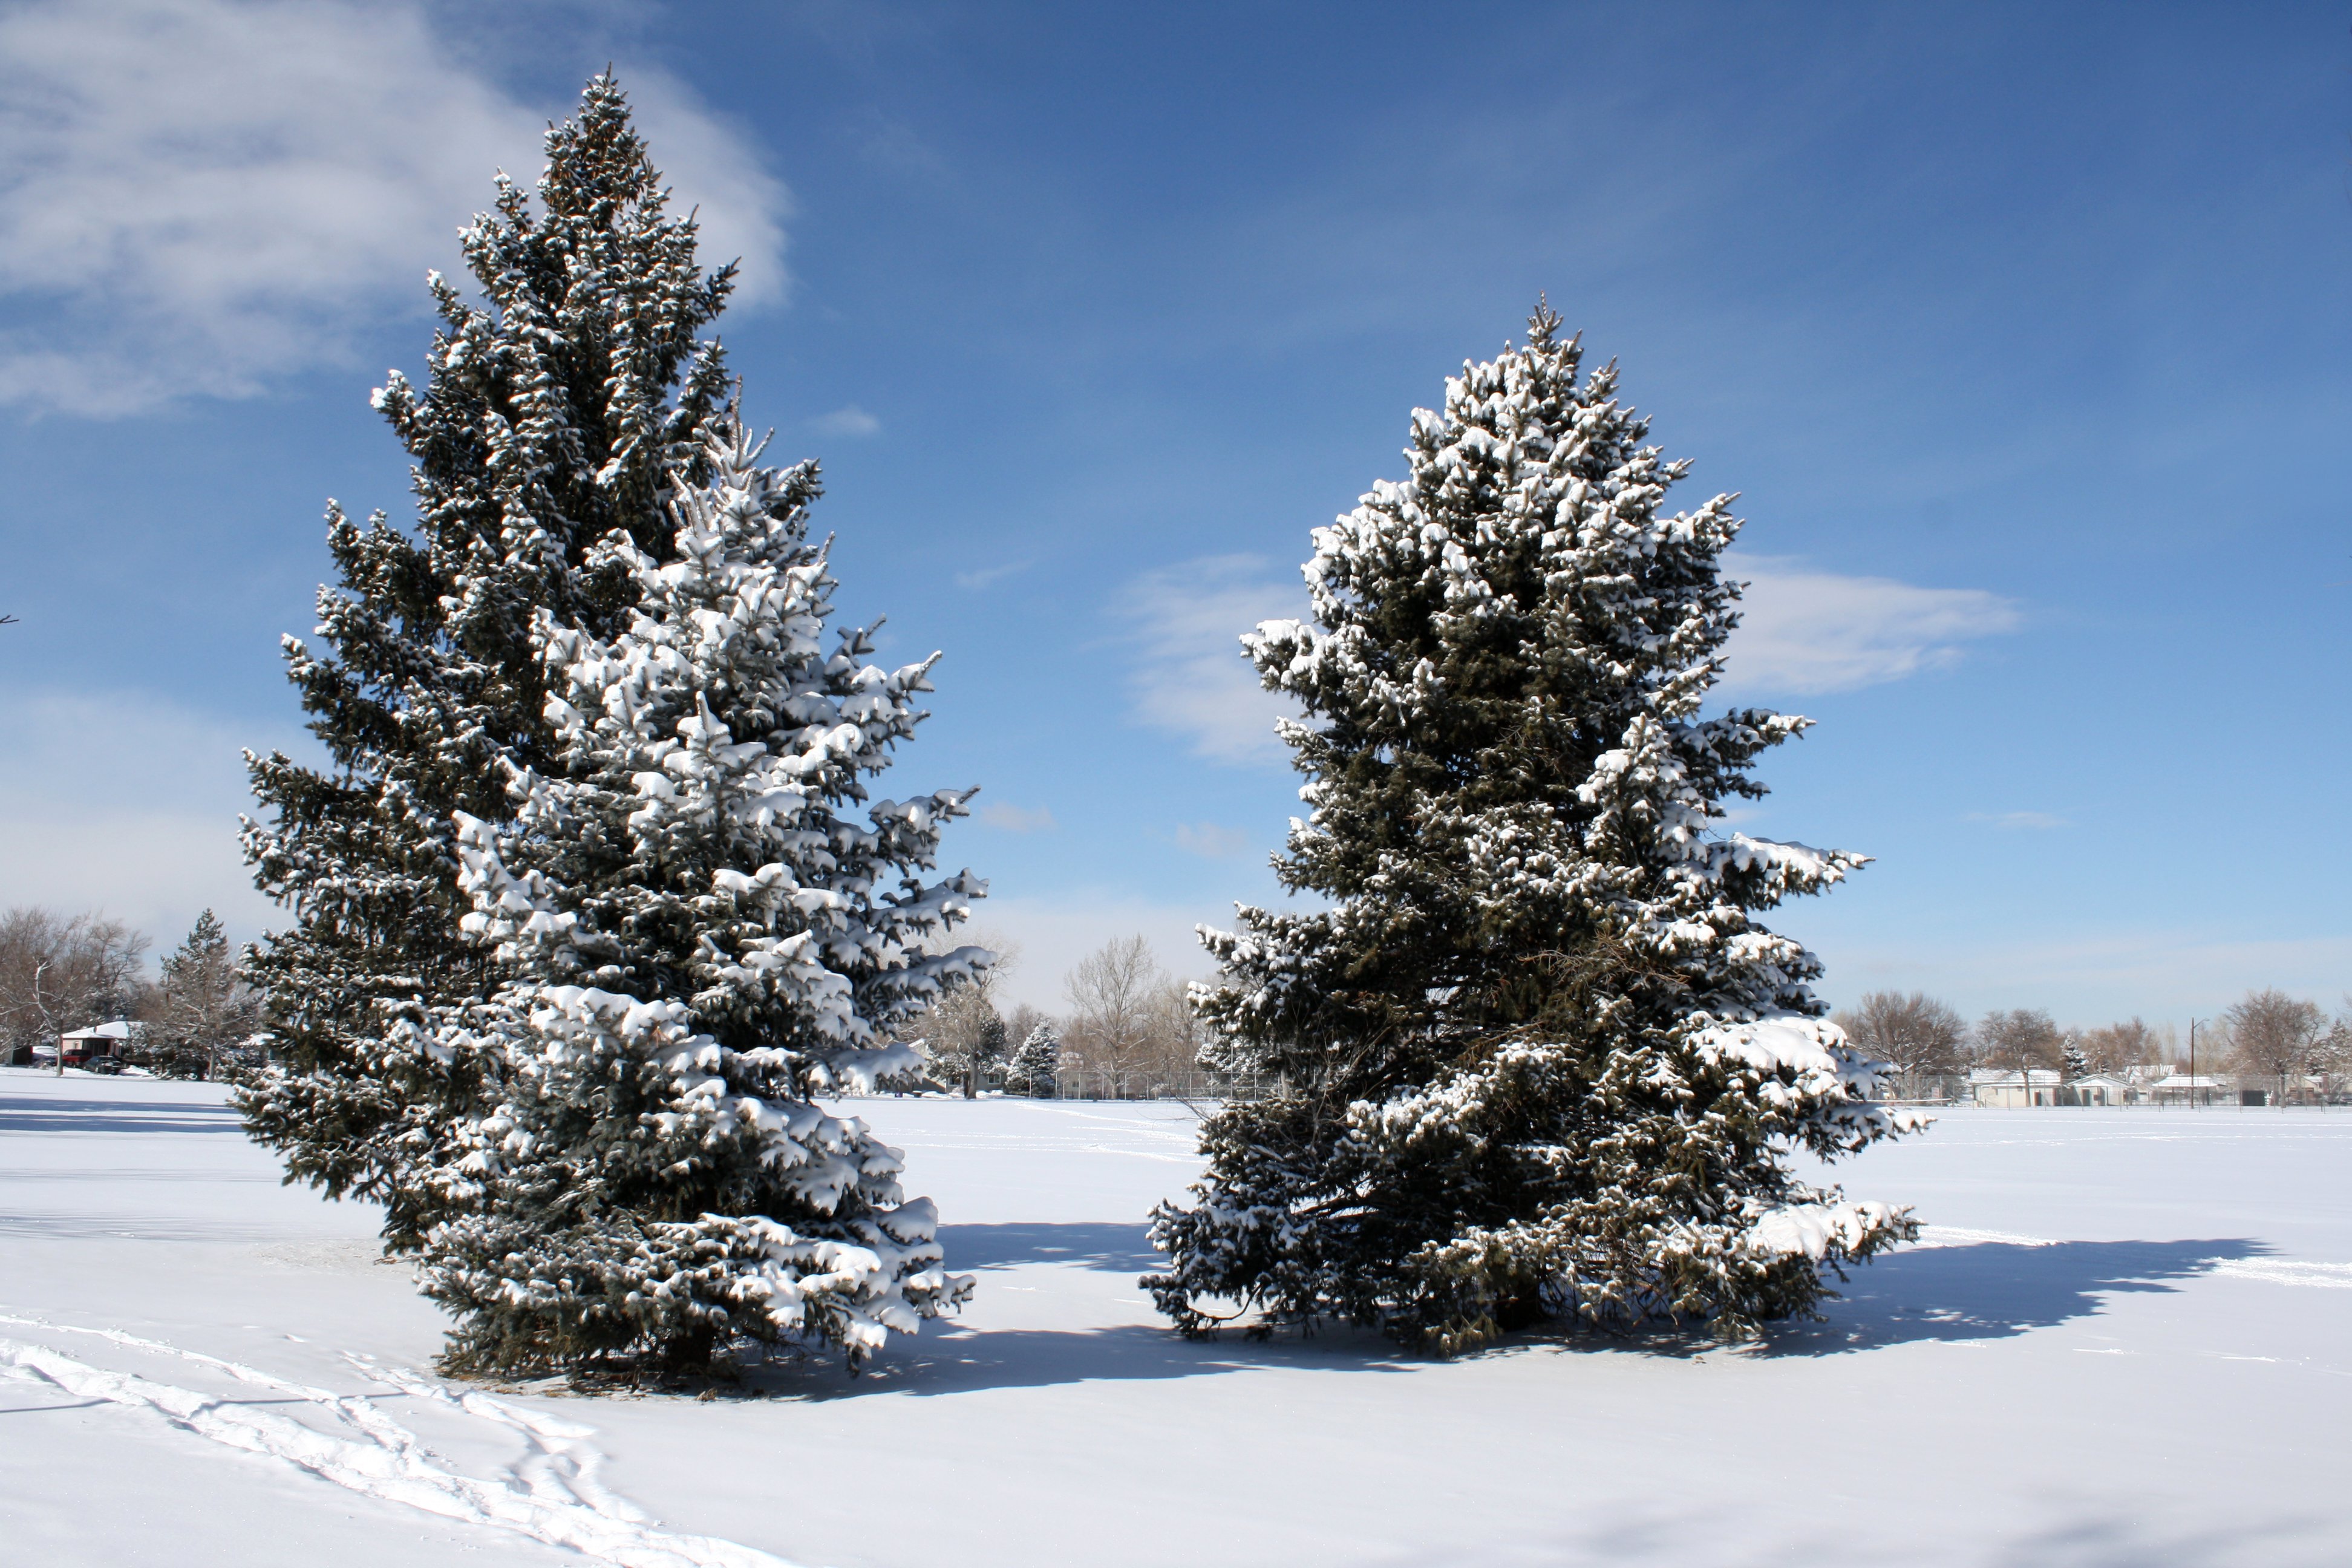 evergreen trees with snow clipart